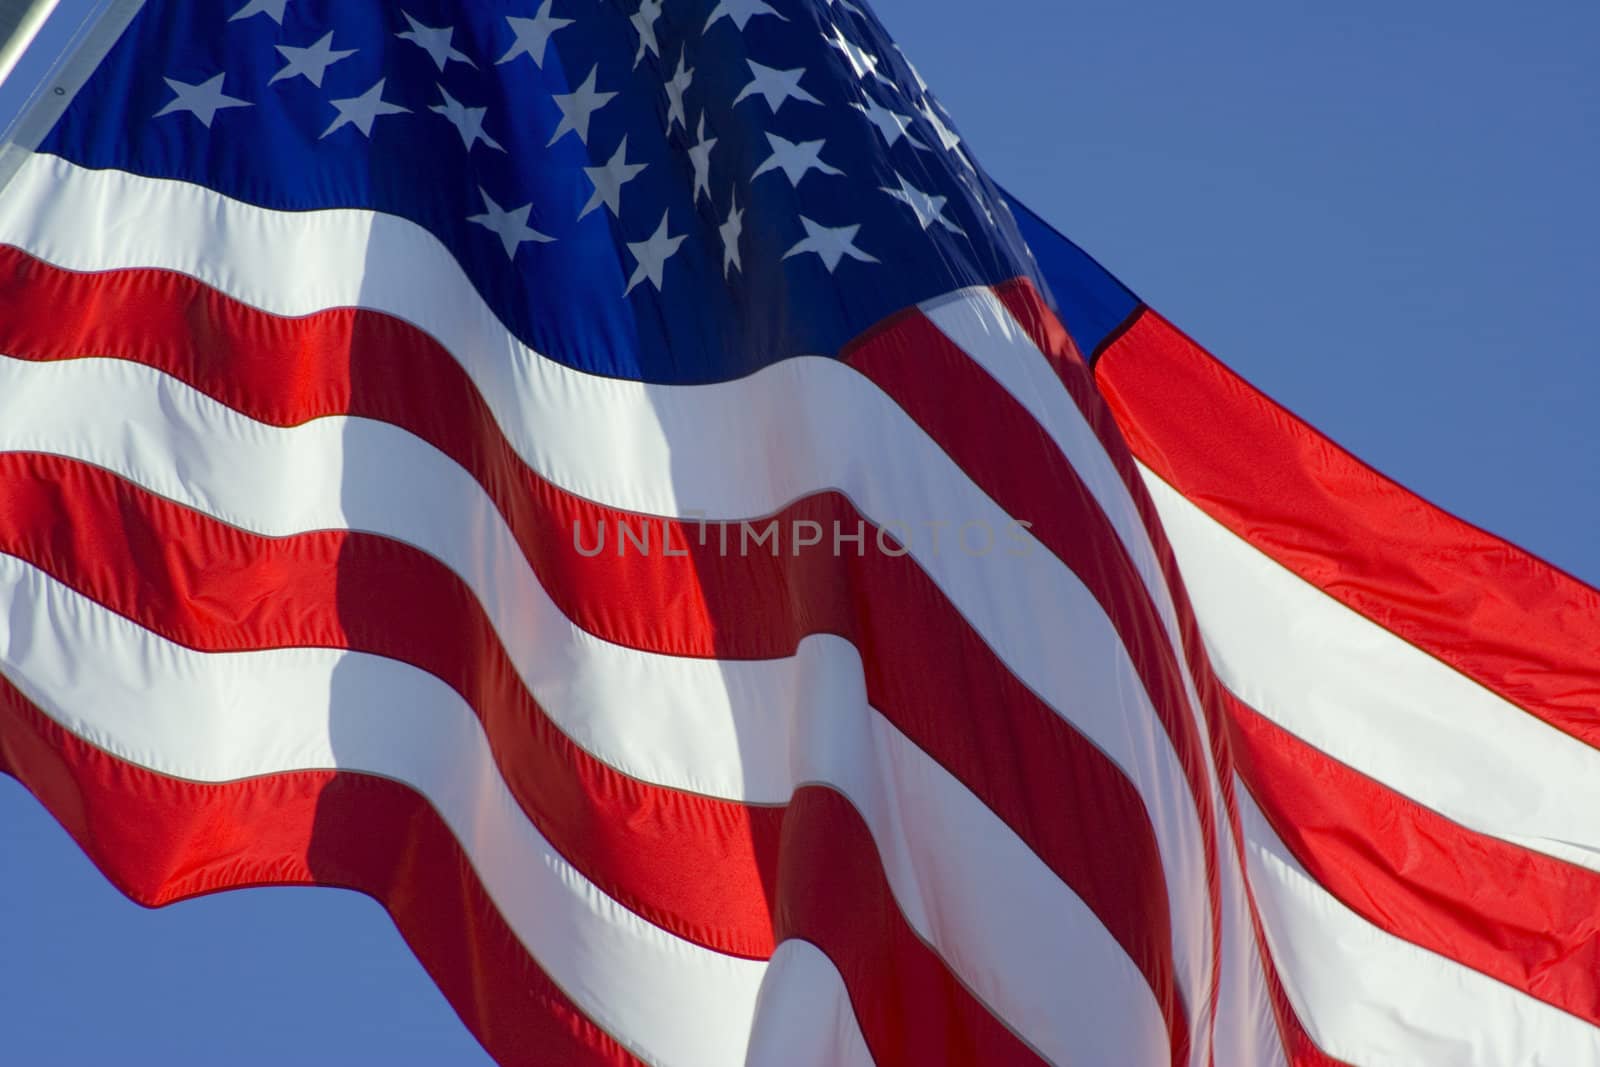 Tilted stars and stripes flying in the wind on deep blue sky nice background for a patriotic display